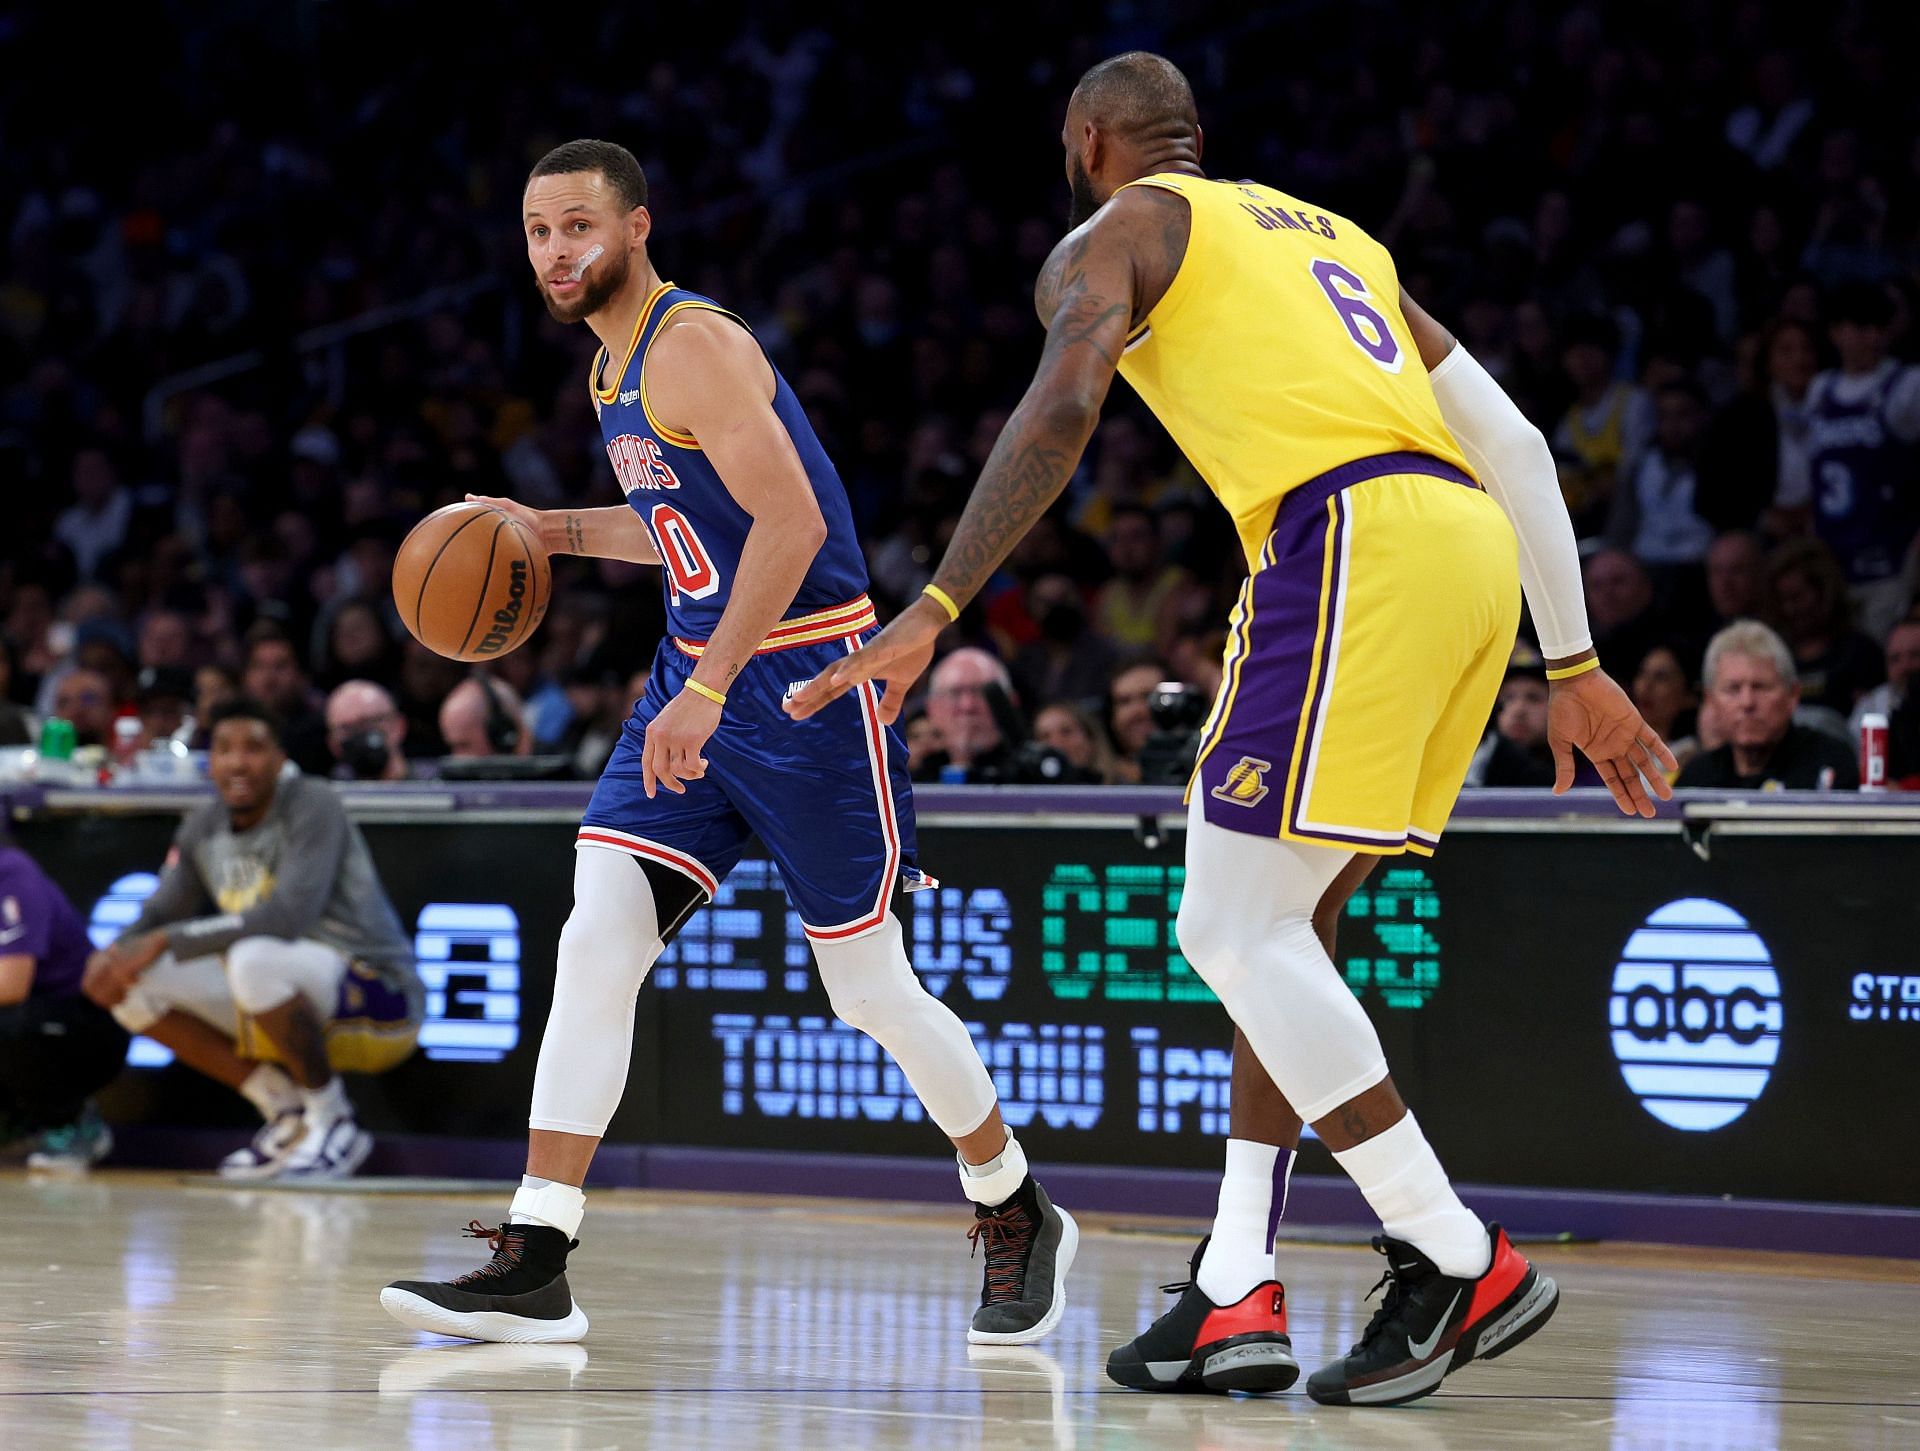 Steph Curry #30 of the Golden State Warriors dribbles in front of LeBron James #6 of the Los Angeles Lakers during a 124-116 Lakers win at Crypto.com Arena on March 05, 2022 in Los Angeles, California.